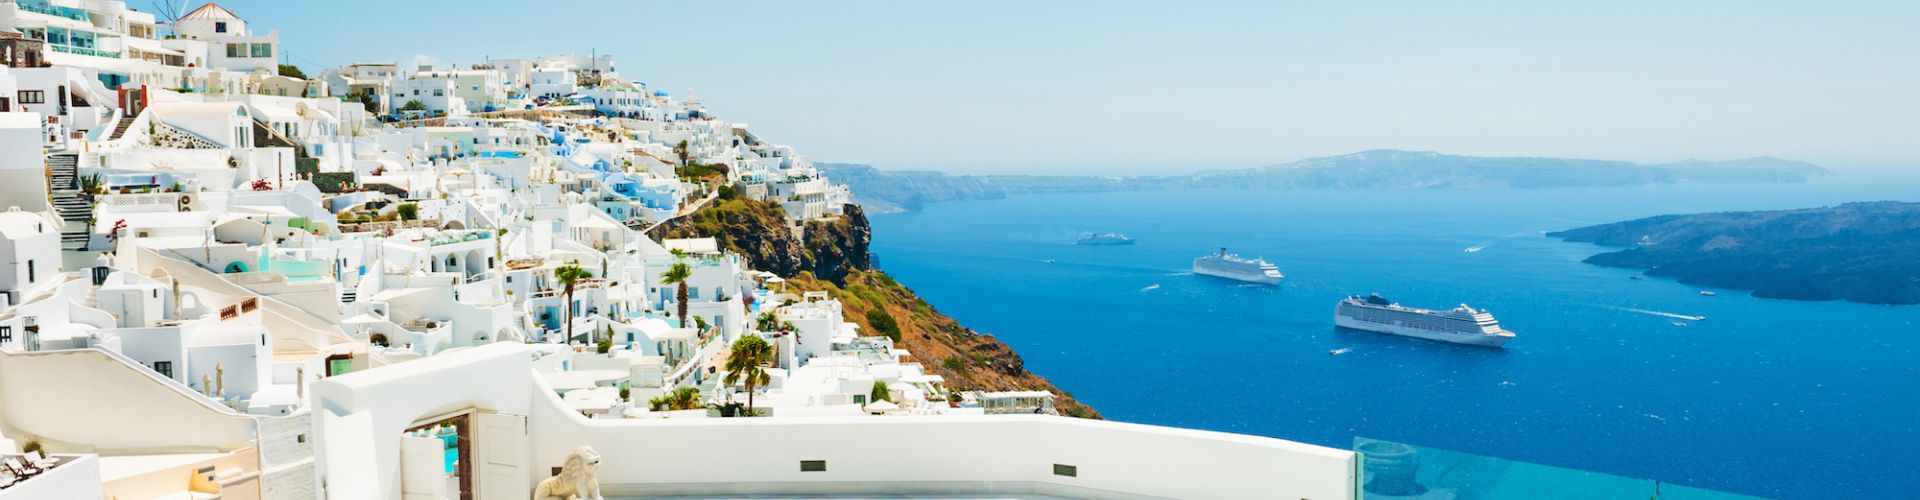 All waterfront property in Greece